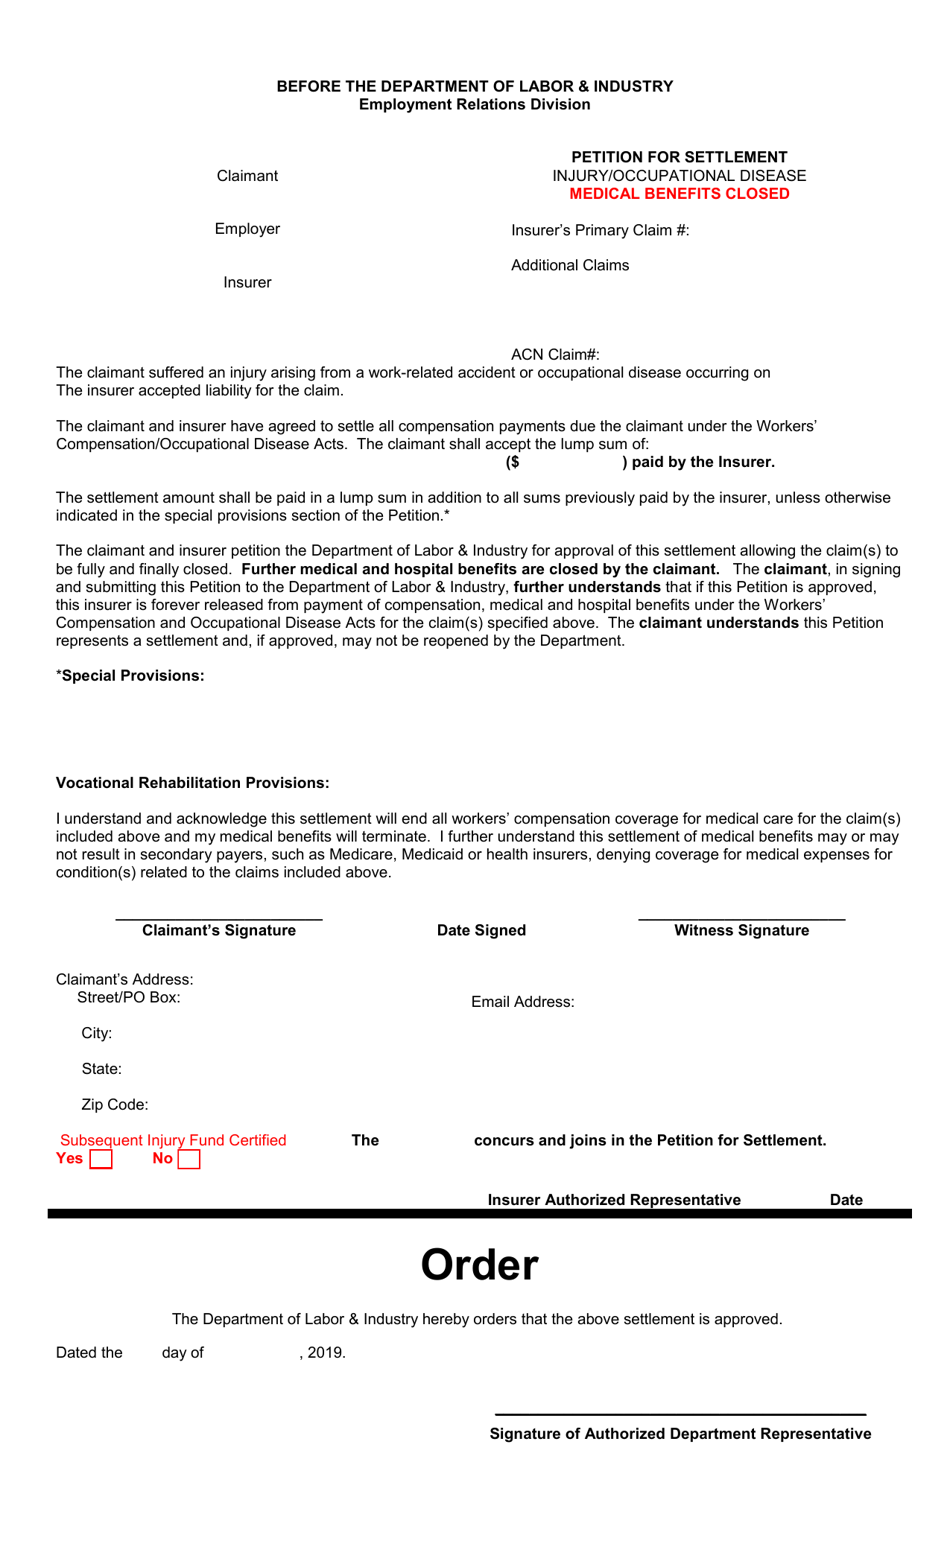 Petition for Settlement - Injury / Od, Medical Benefits Closed - Montana, Page 1